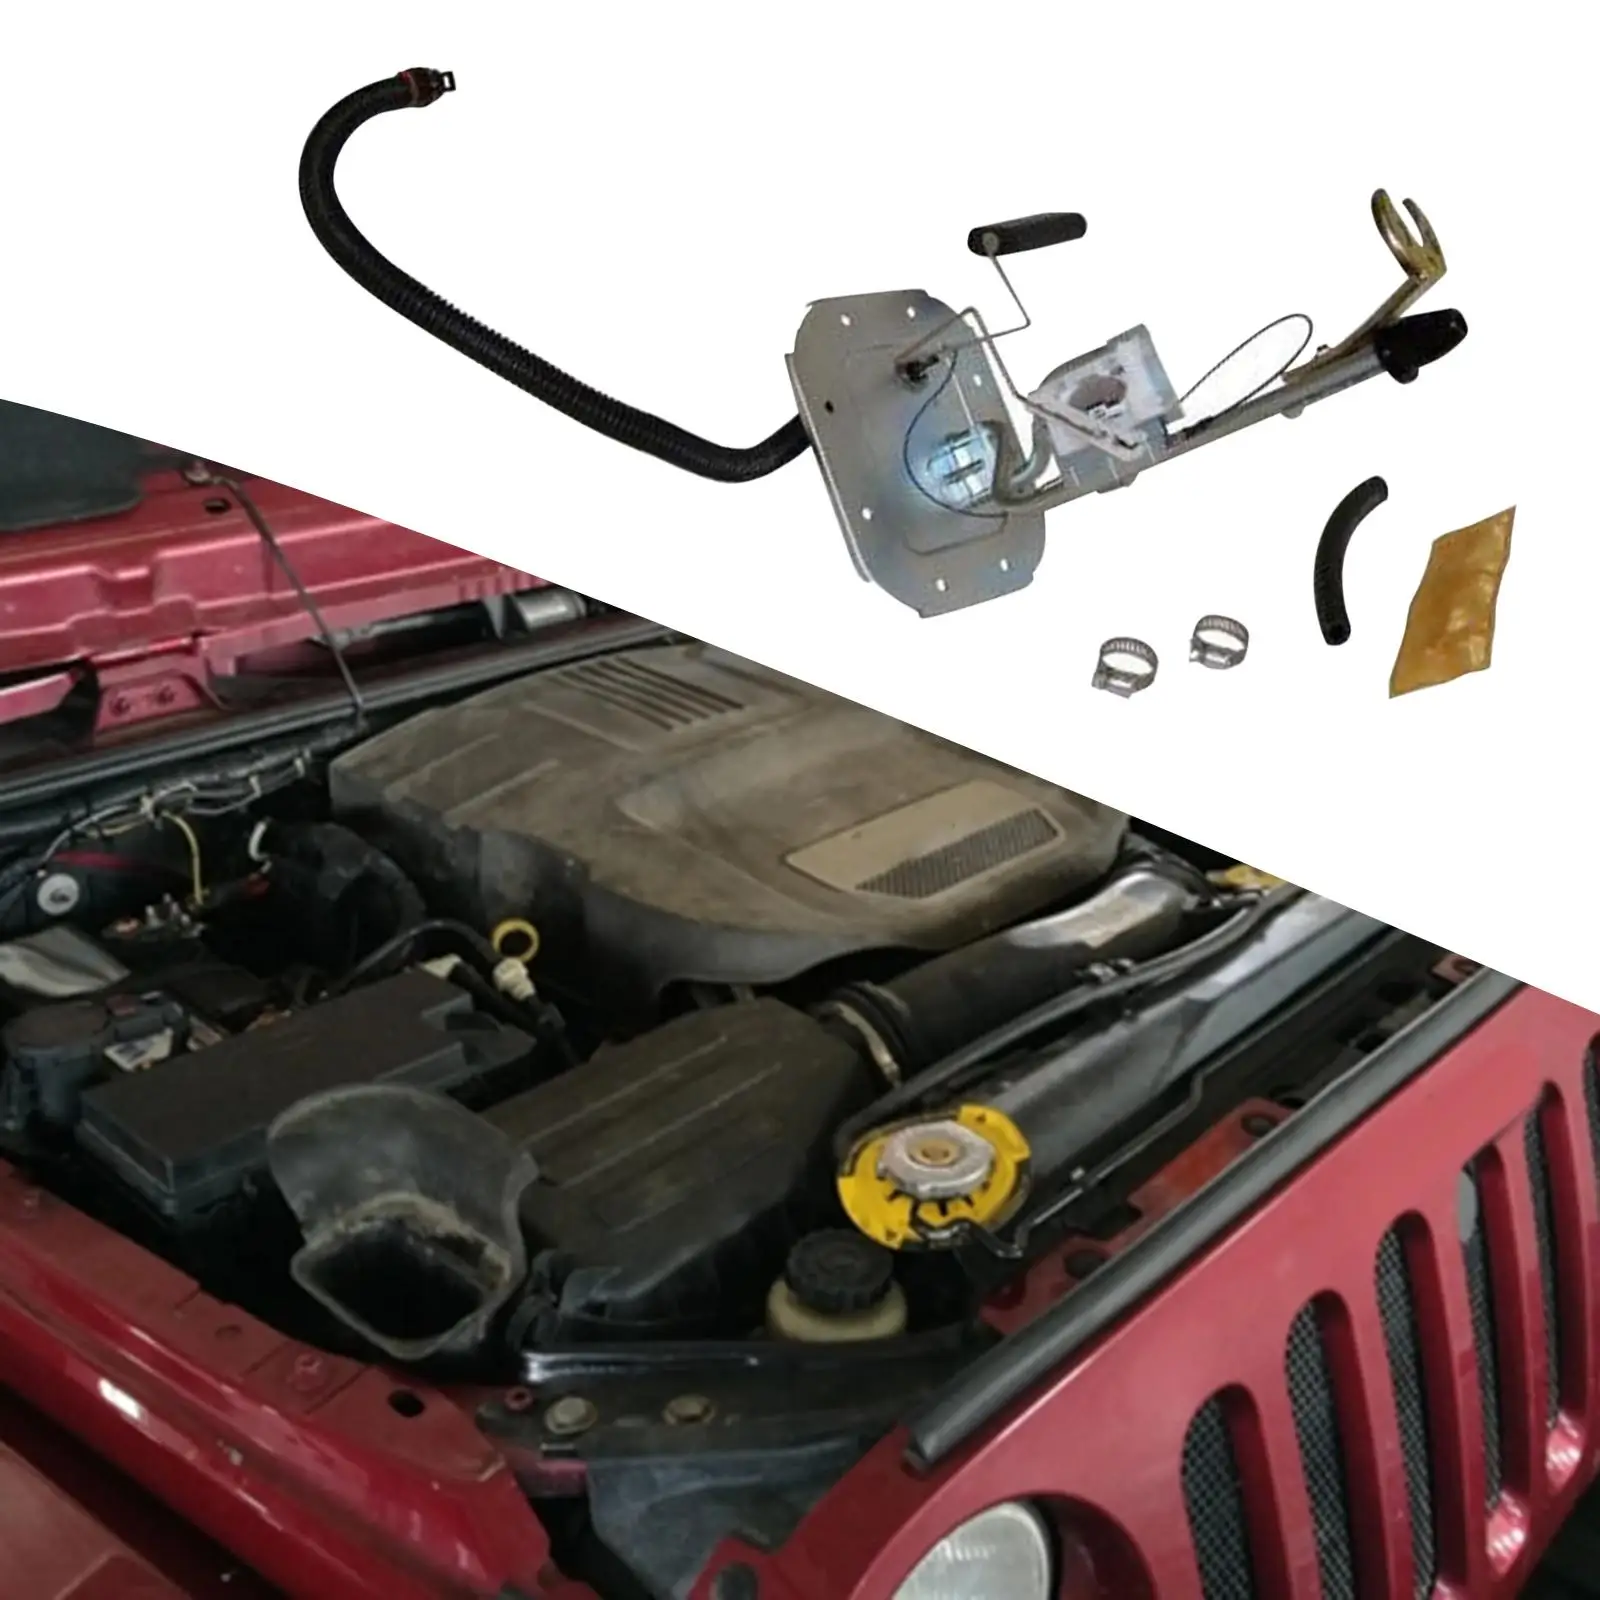 Automotive Fuel Sending Unit 53003341x Easy to Install Professional Durable Repair Parts Assesories for Jeep Wrangler Yj